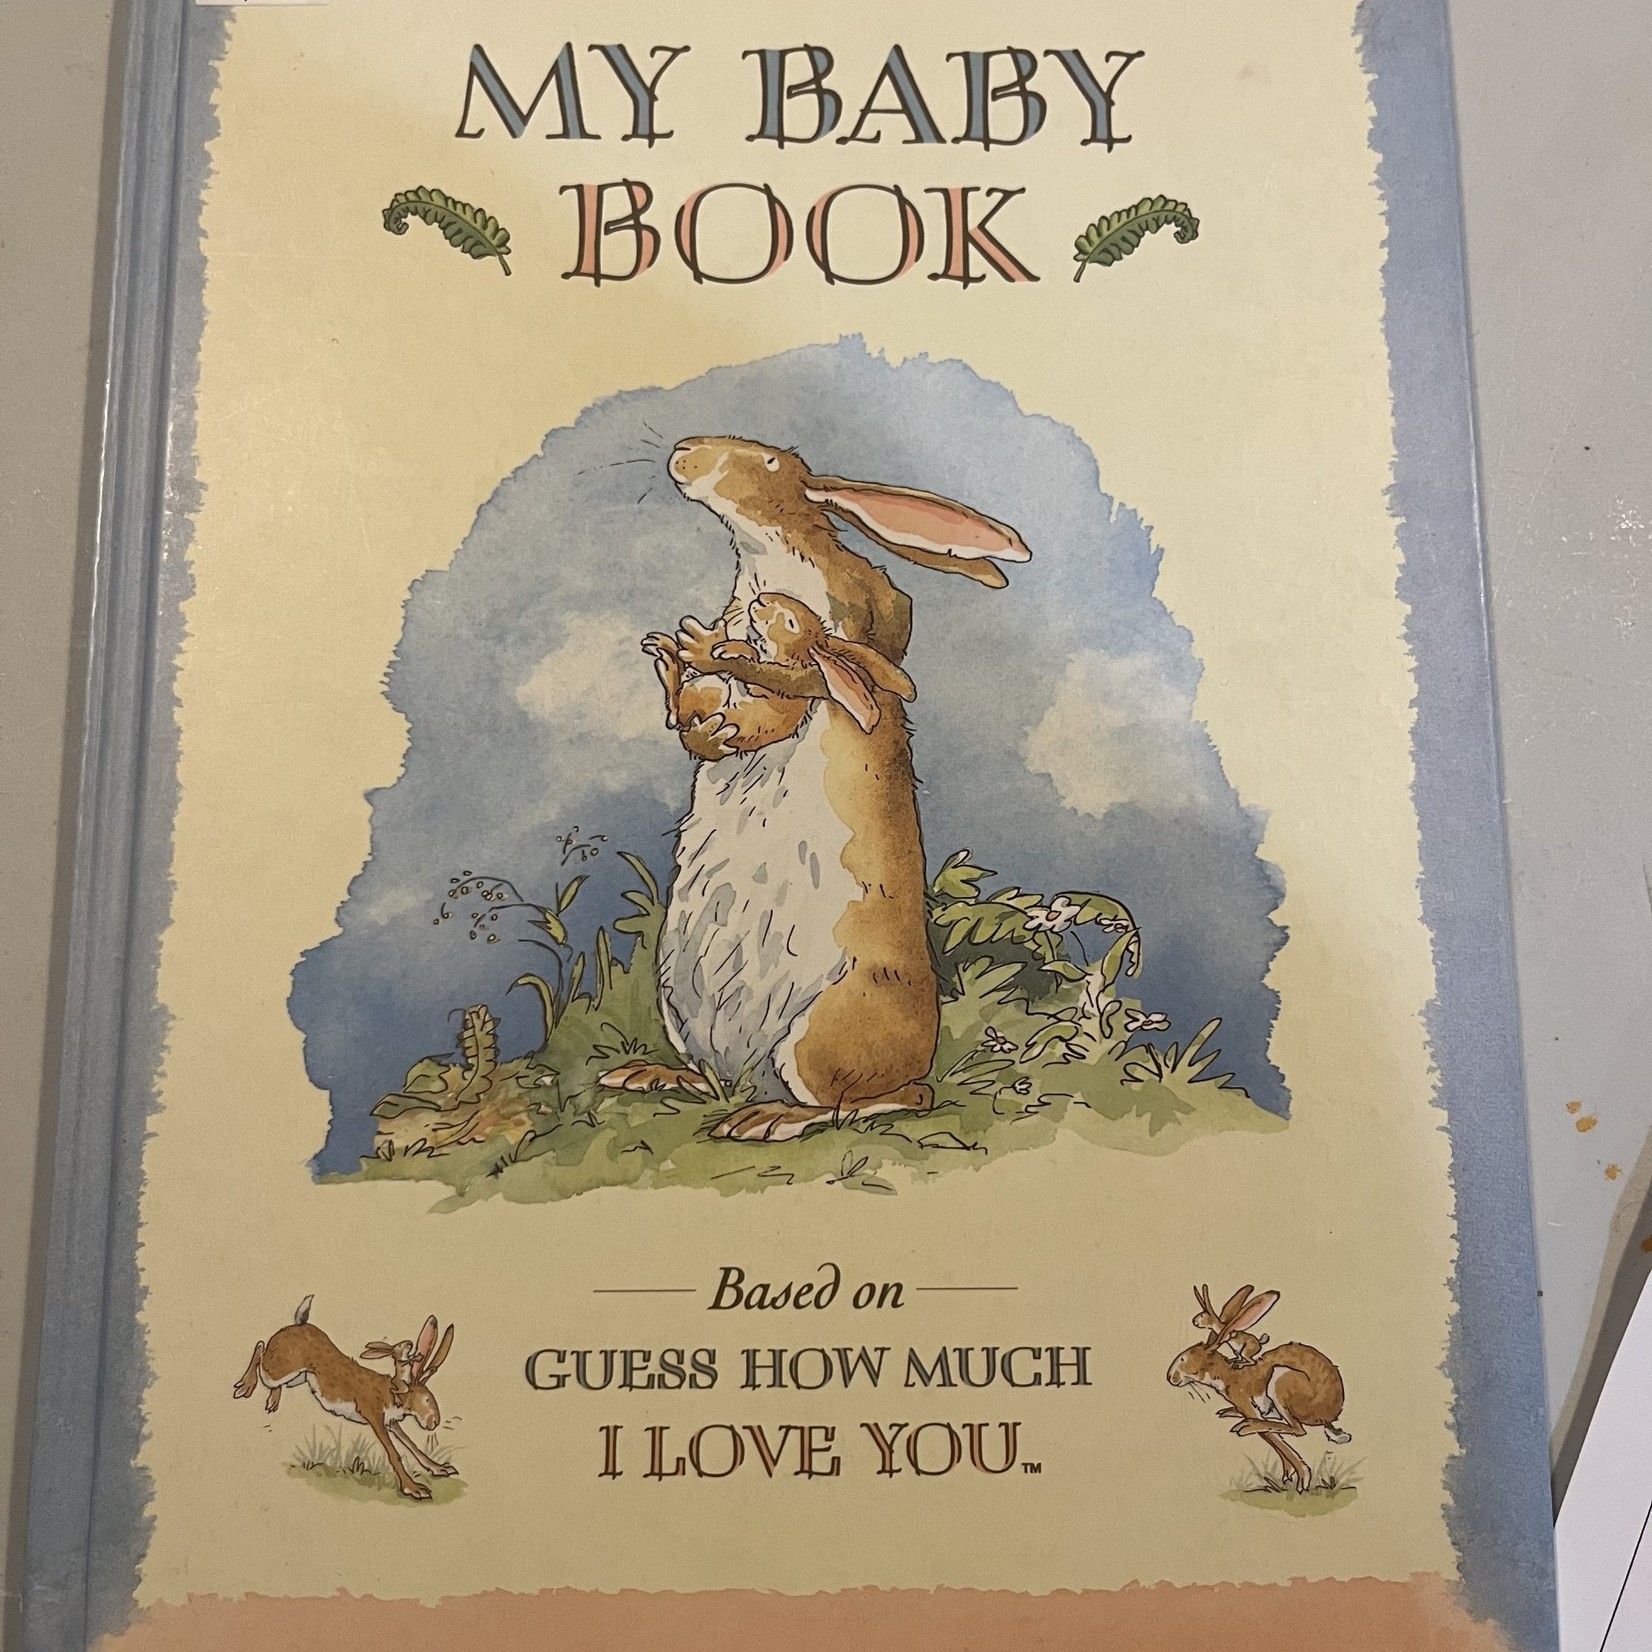 My Baby Book - Based on Guess How Much I Love You